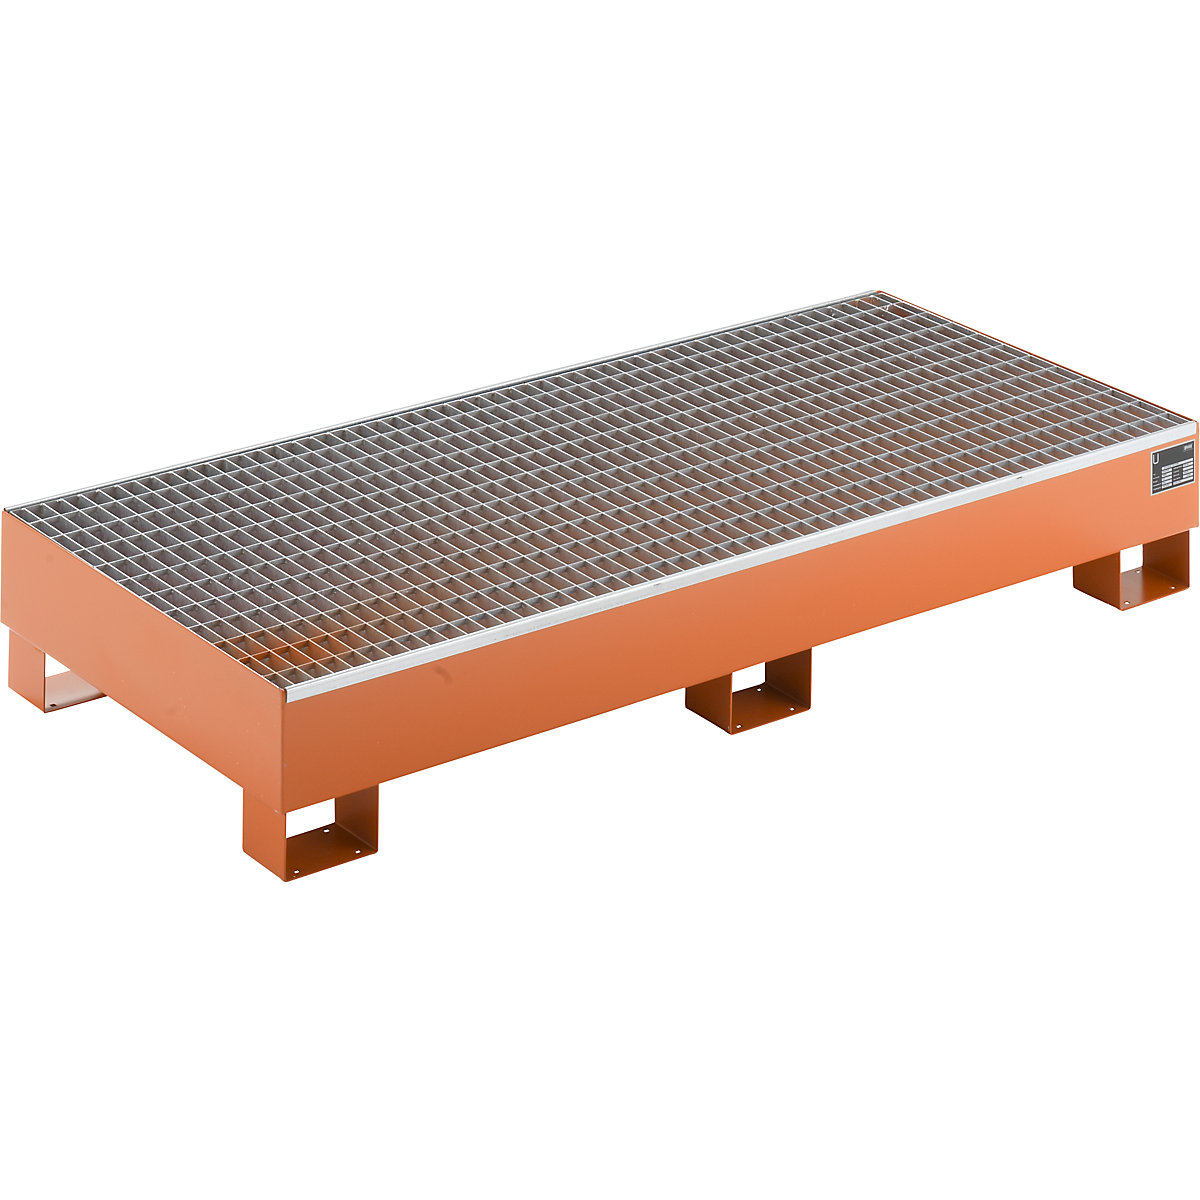 EUROKRAFTbasic – Sump tray made from sheet steel, LxWxH 1800 x 800 x 275 mm, orange RAL 2000, with grate